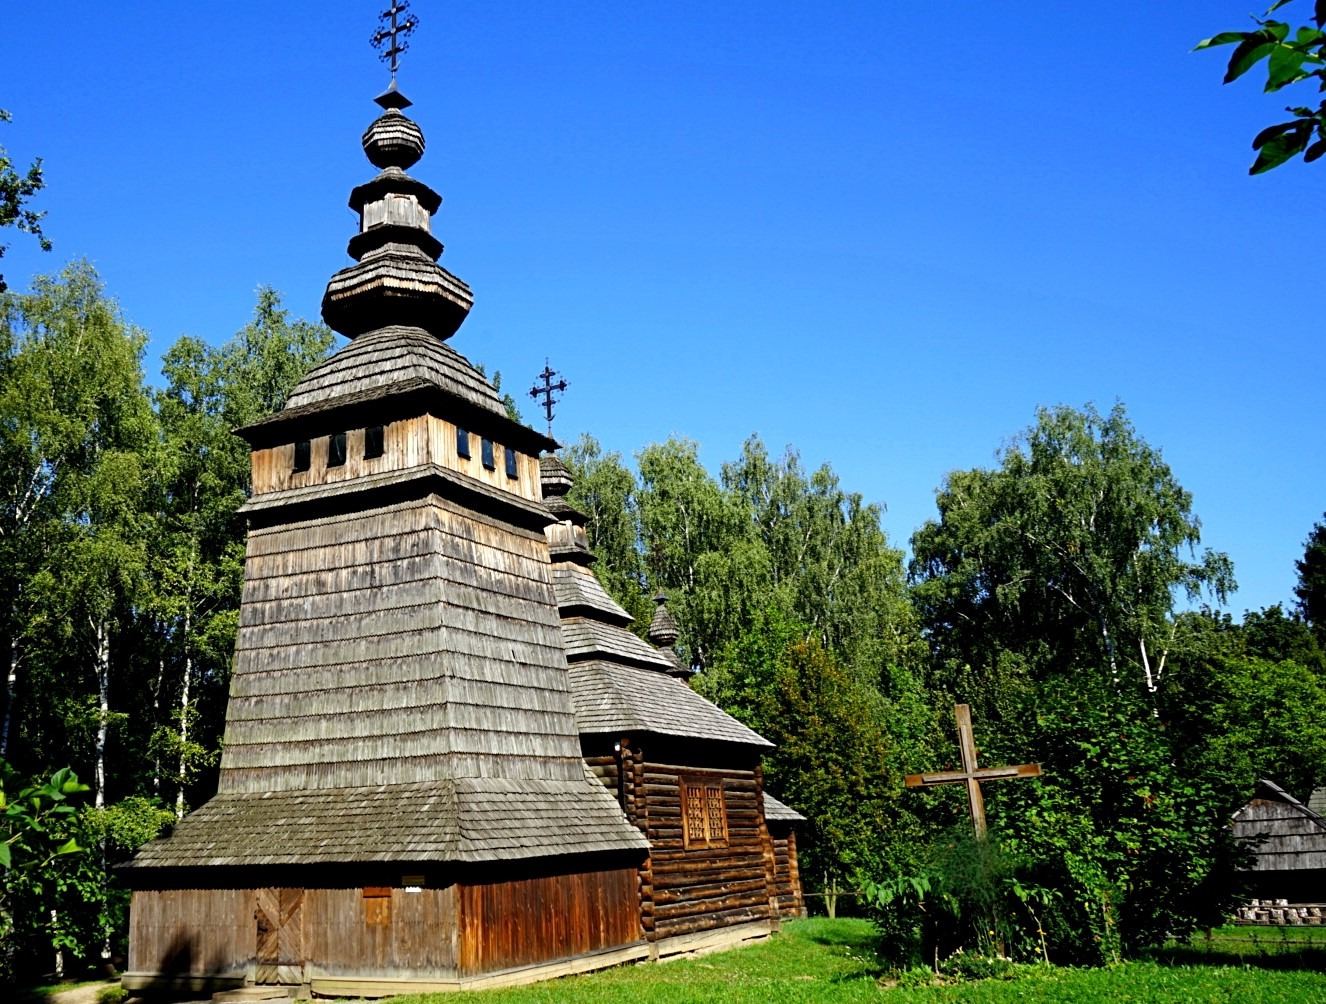  Museum of Folk Architecture in Lviv, old wooden church